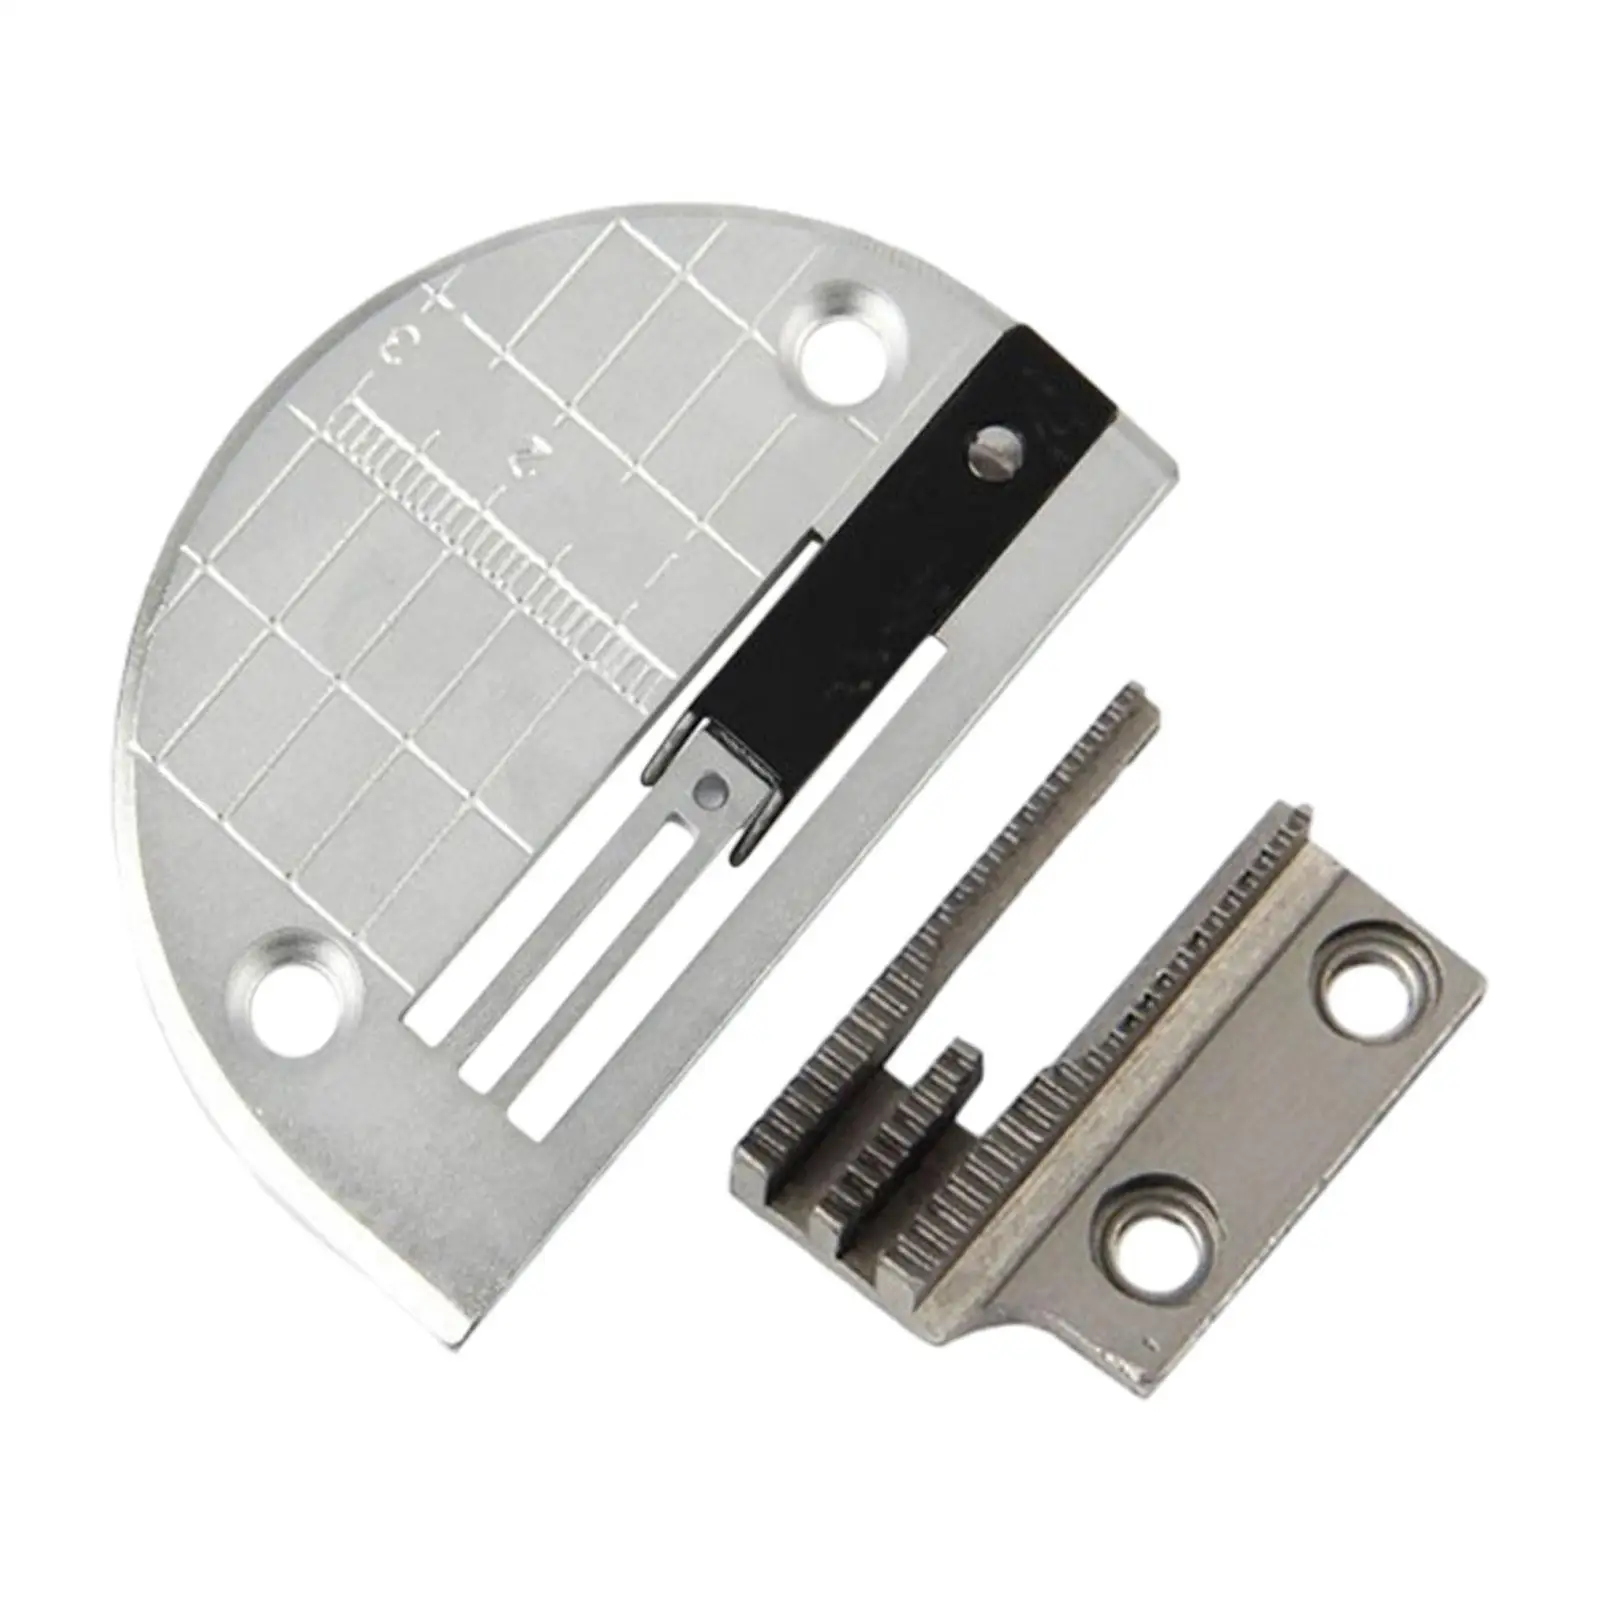 Pin Plate and feed Dog Heavy Duty Durable Lightweight Domestic DIY Portable Household Tool Sewing Machine Accessories Parts